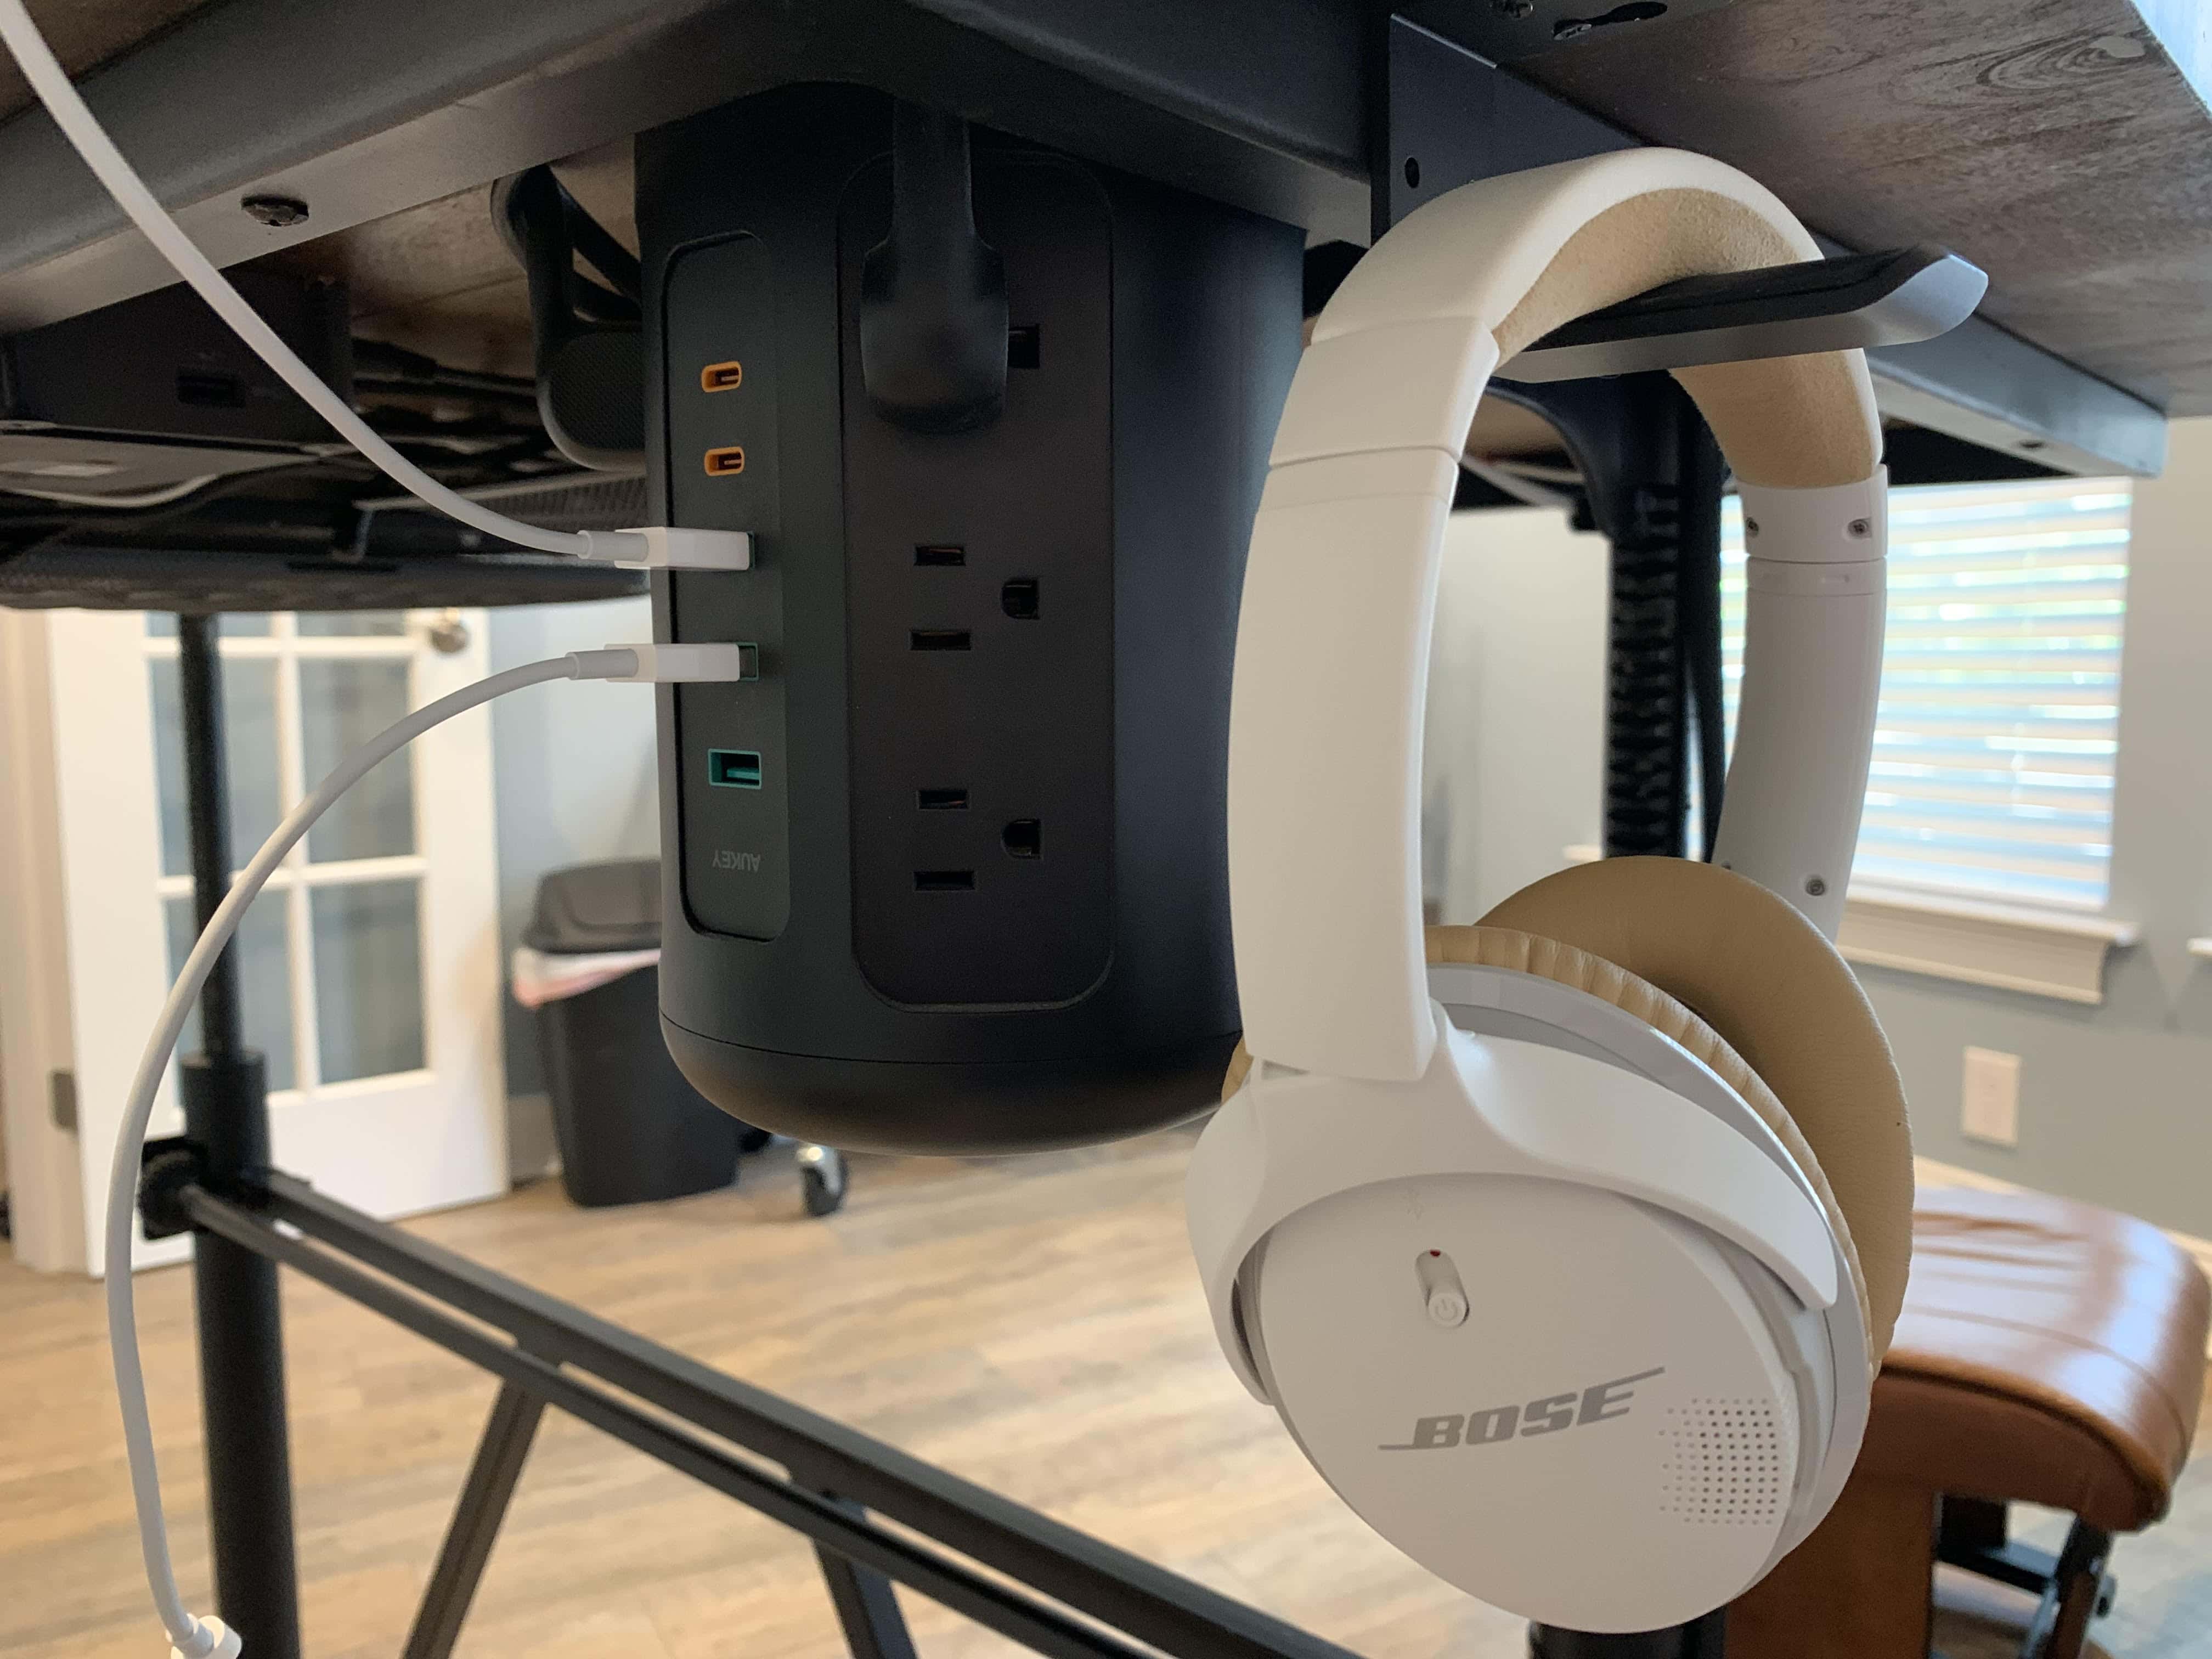 An Aukey power strip tower and headphone hook under the desk also help keep things neat and tidy.